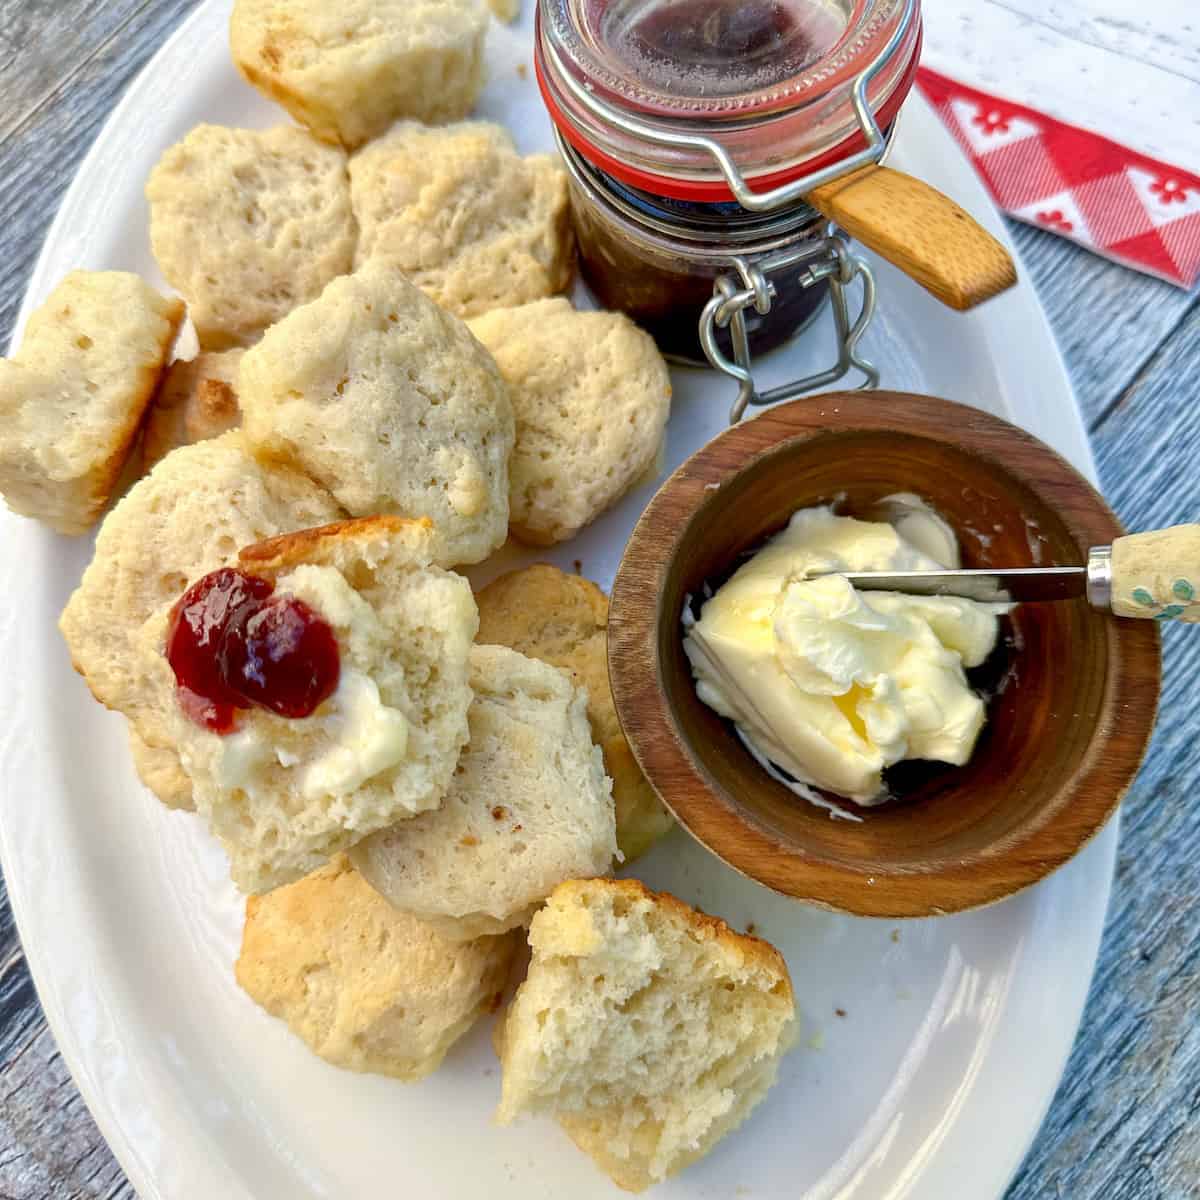 Baked biscuits on a plate with a bowl of butter and jar of jam.